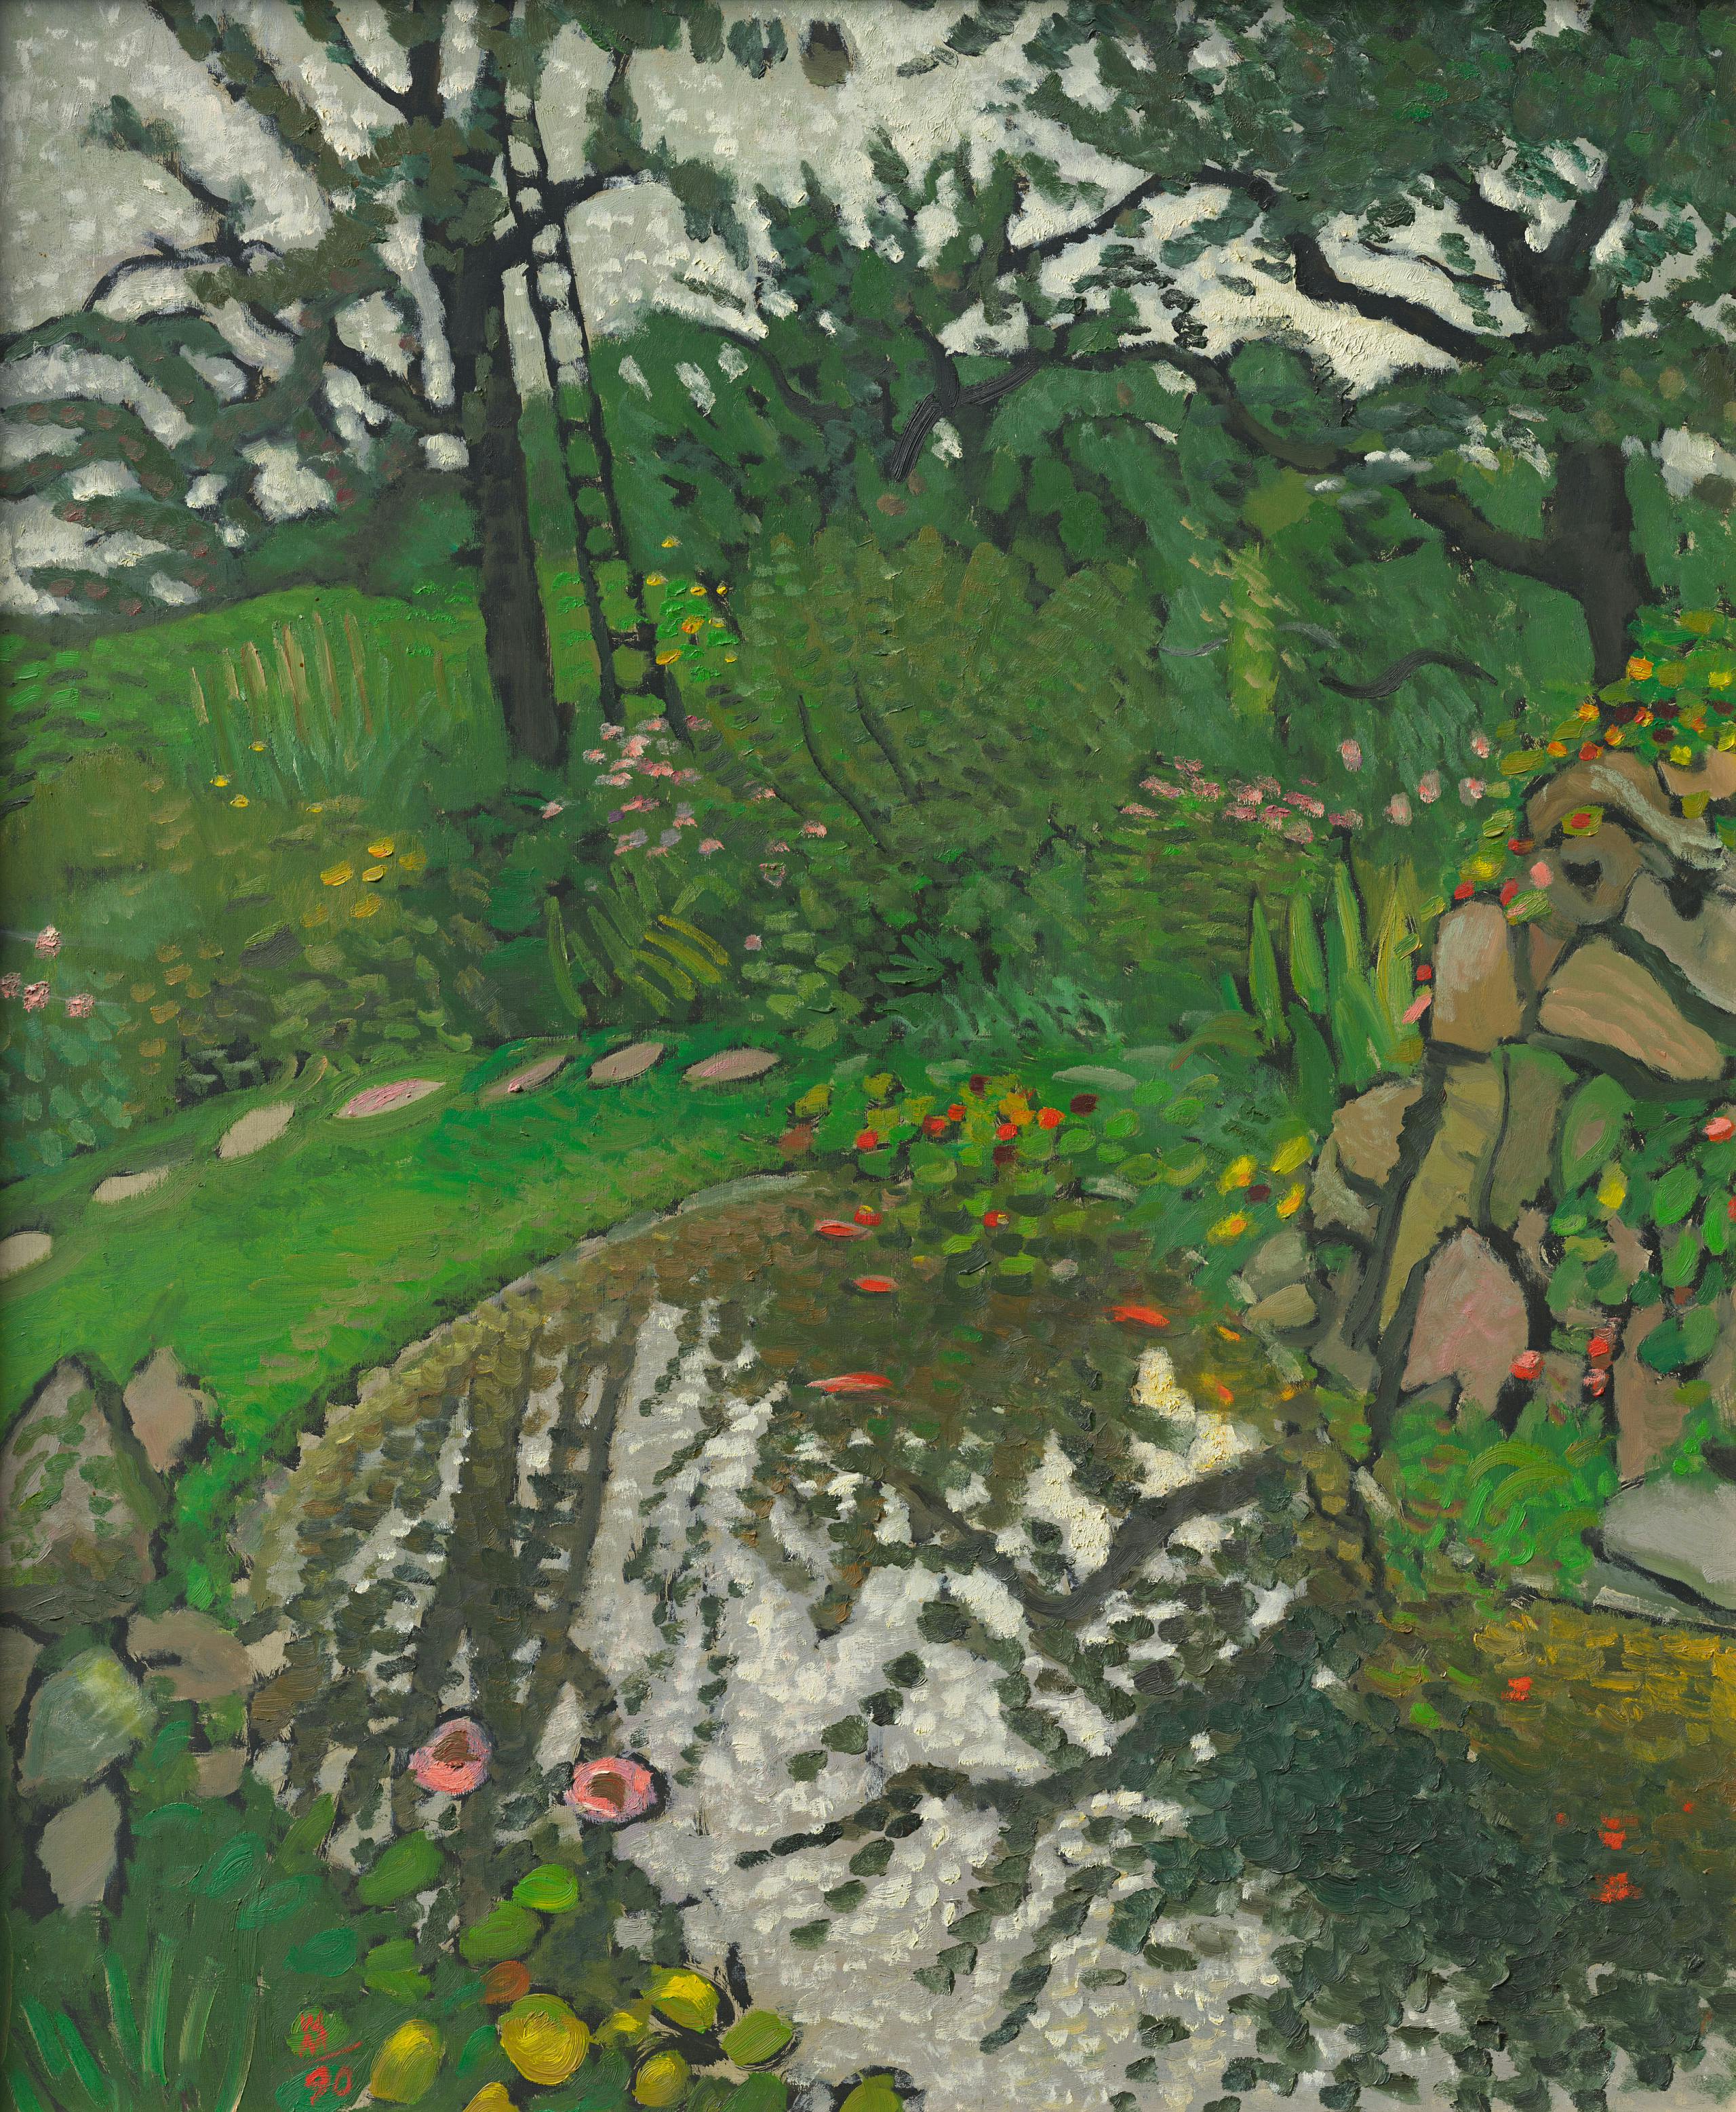 Painting: A garden in full bloom, with a pond in which the trees are reflected. A ladder leans against a tree.